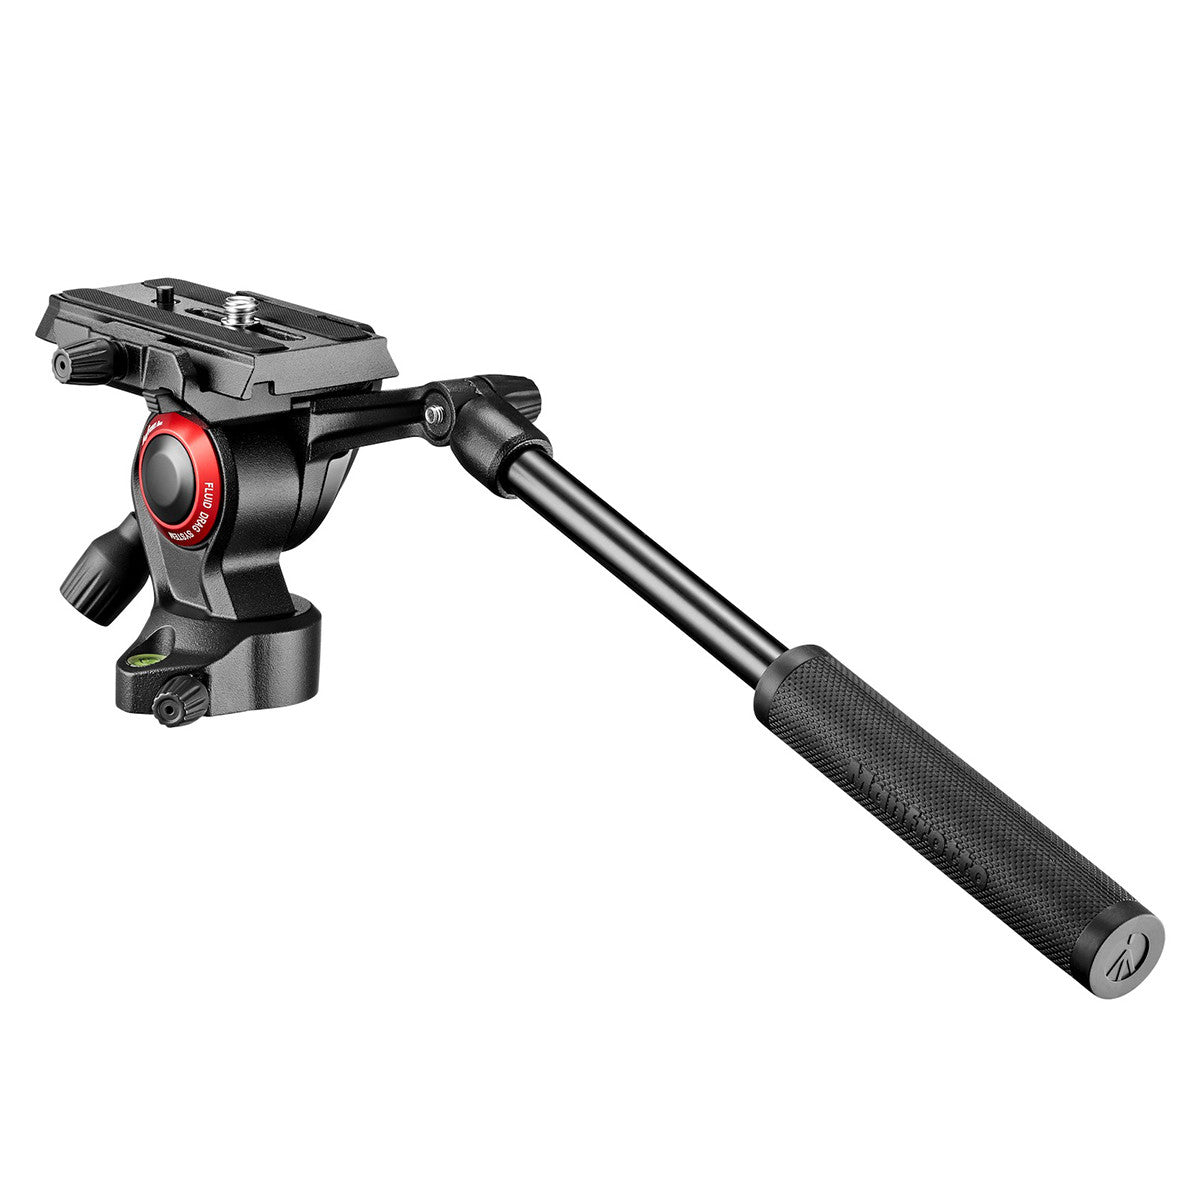 Manfrotto Befree Live Fluid Head in Manfrotto Befree Live Fluid Head - goHUNT Shop by GOHUNT | Manfrotto - GOHUNT Shop